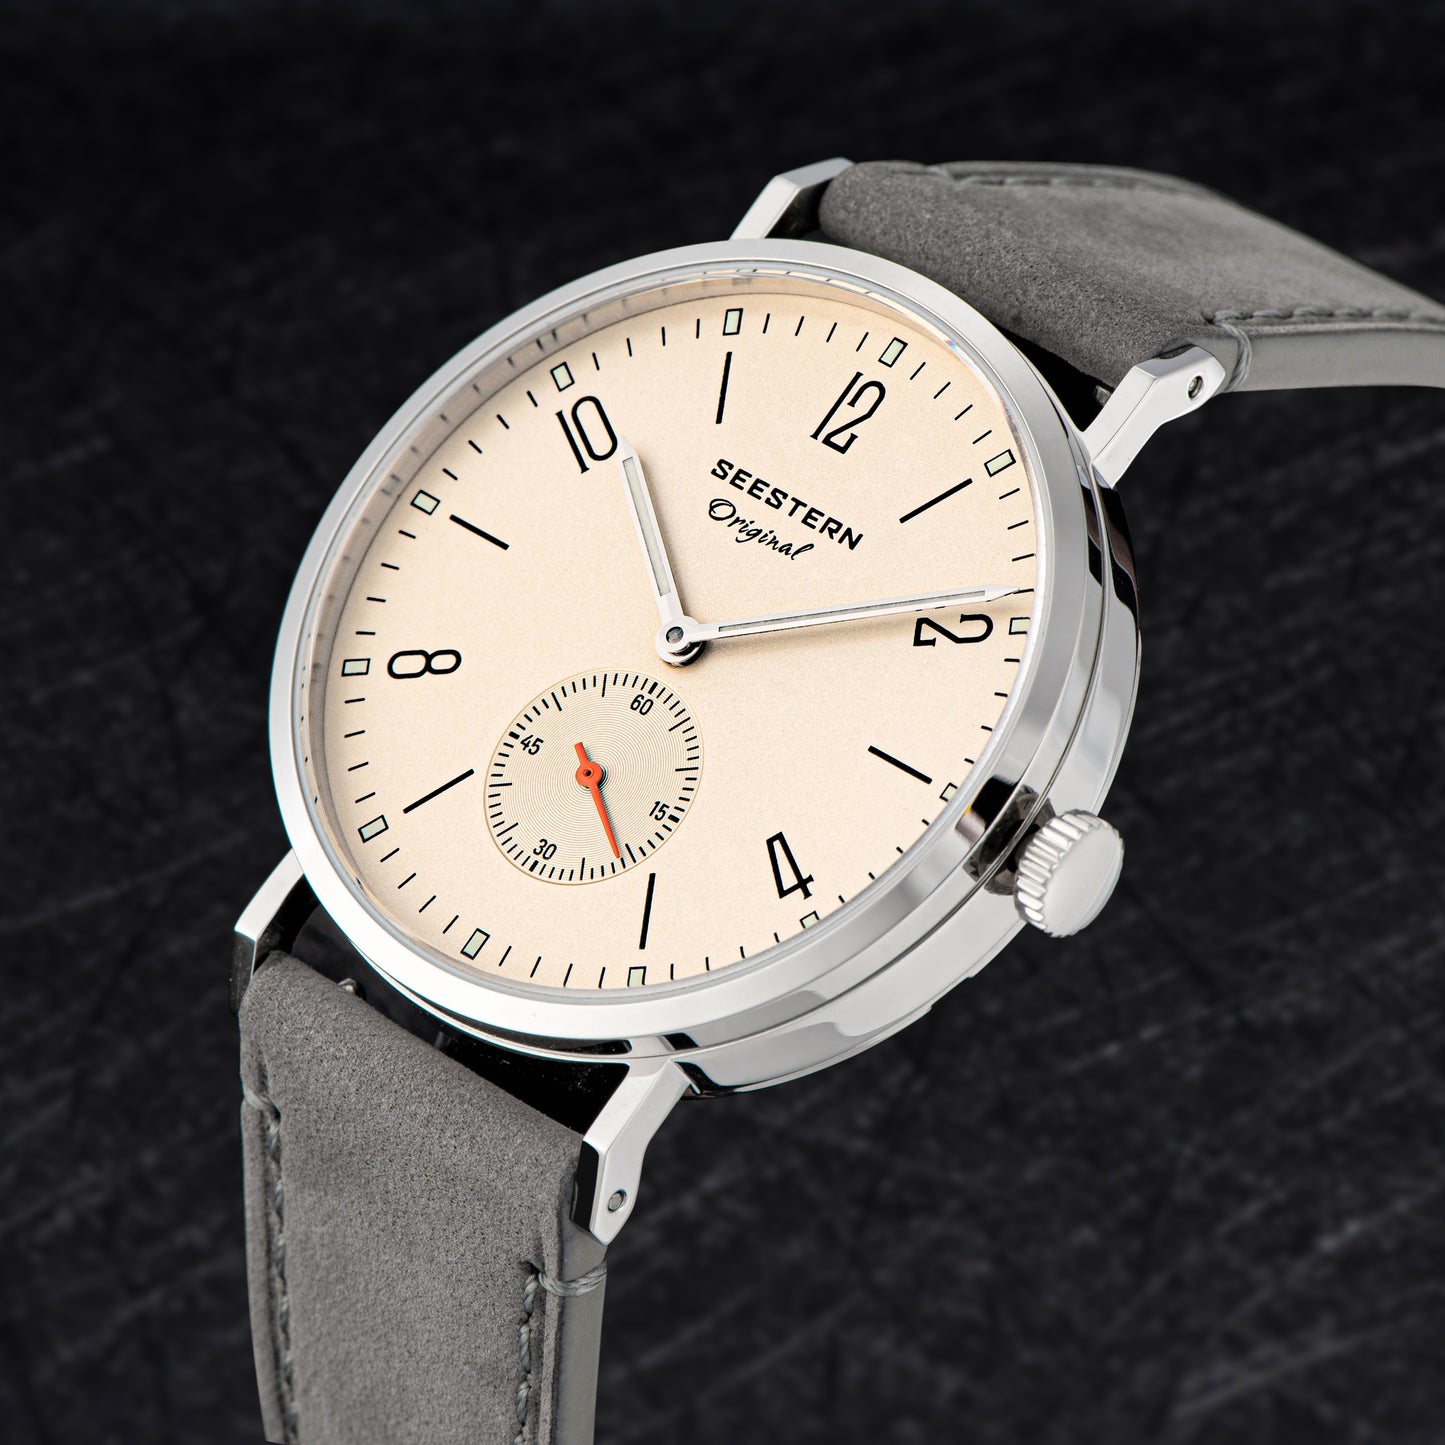 Seestern Automatic S382 38mm Classic Automatic Watch